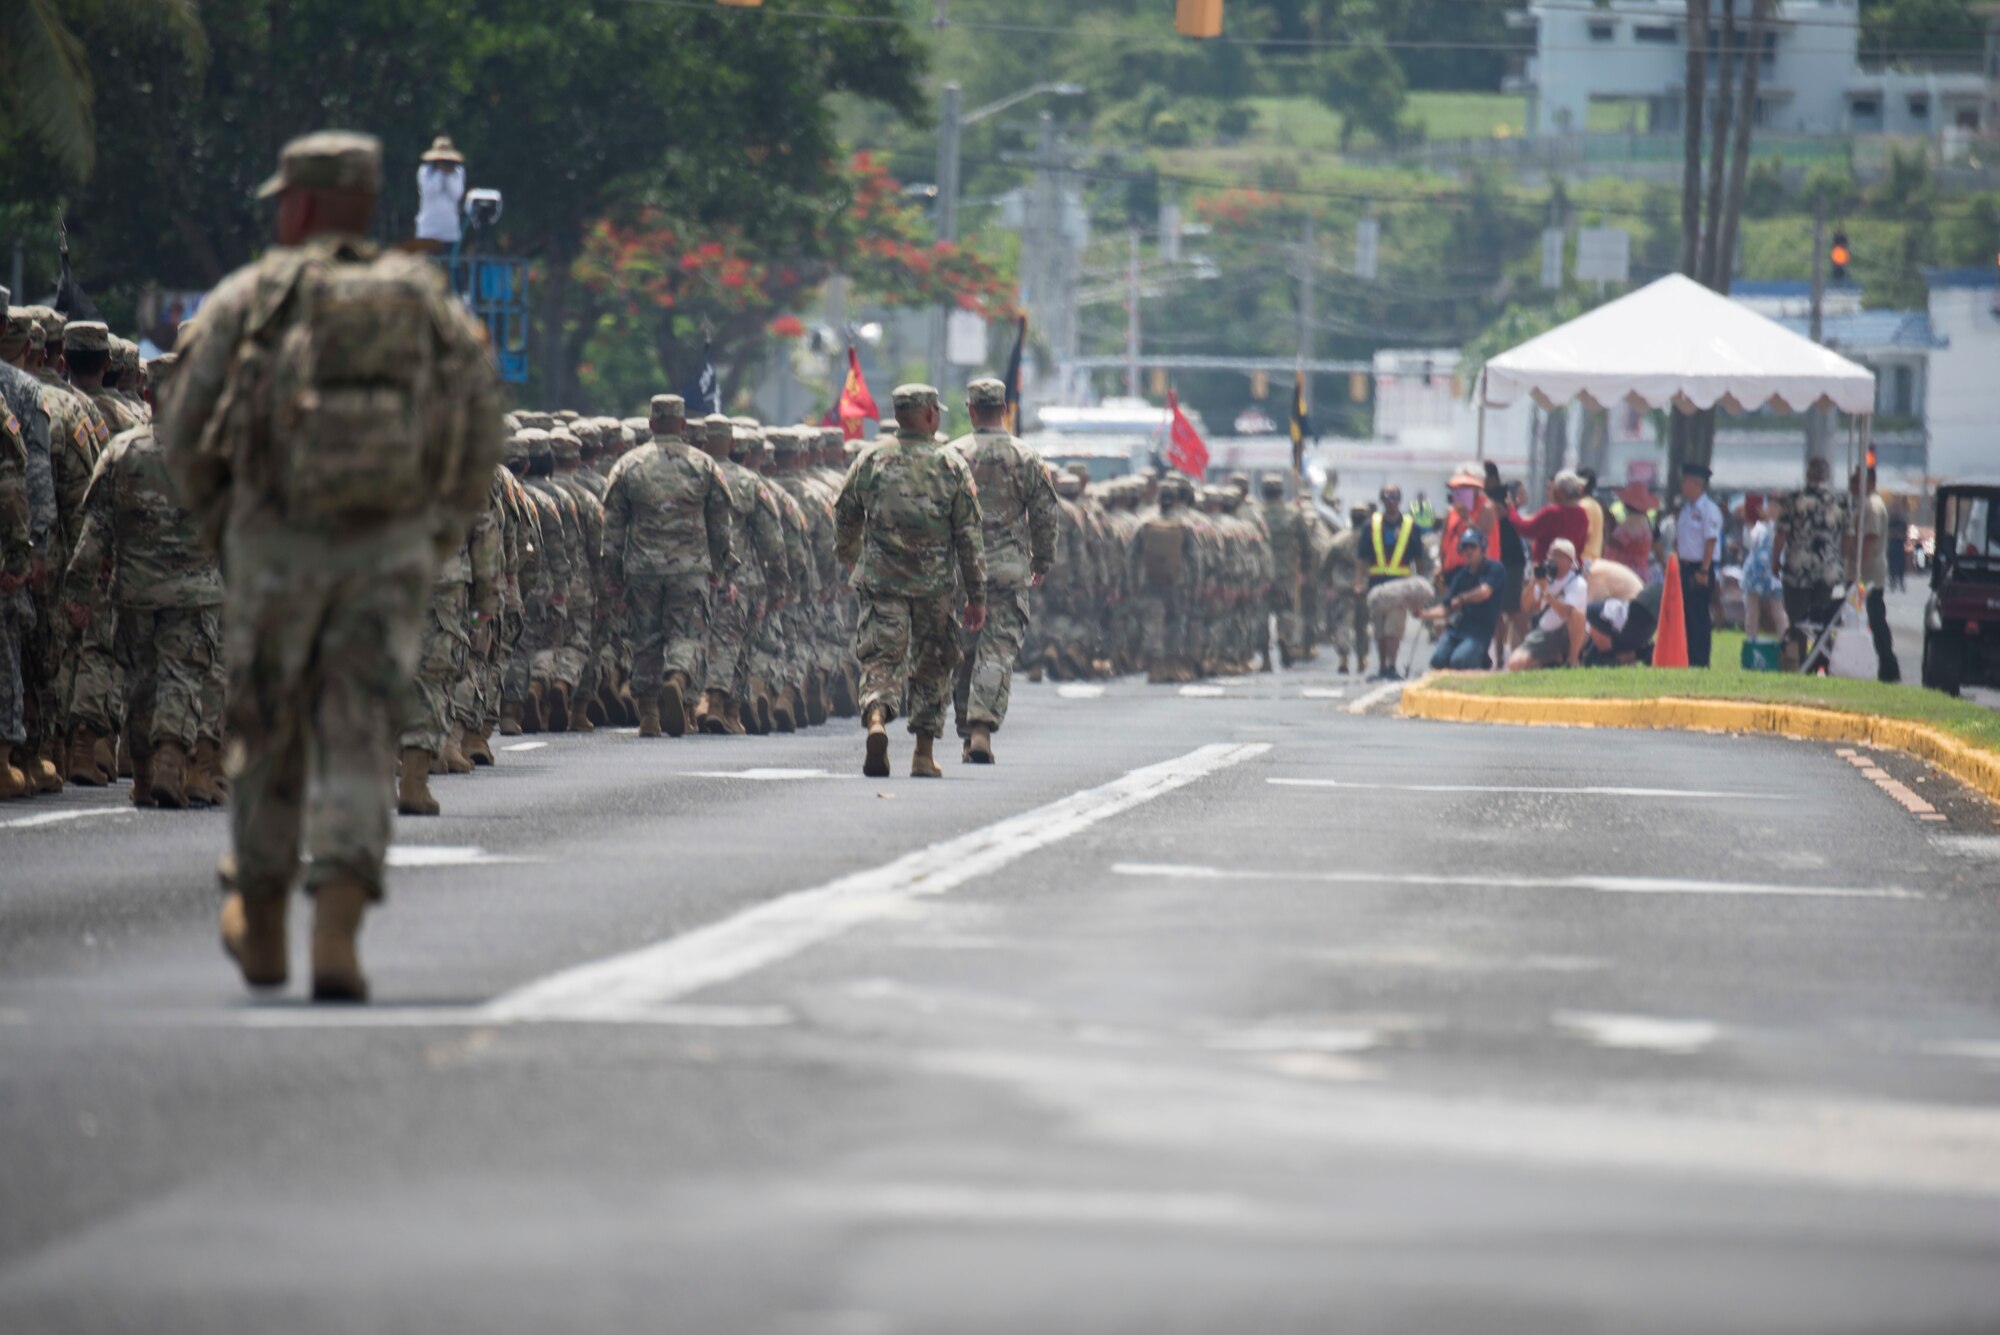 Members of multiple U.S. military branches participate in the 75th Annual Liberation Day parade July 21, 2019, in Hagatna, Guam.